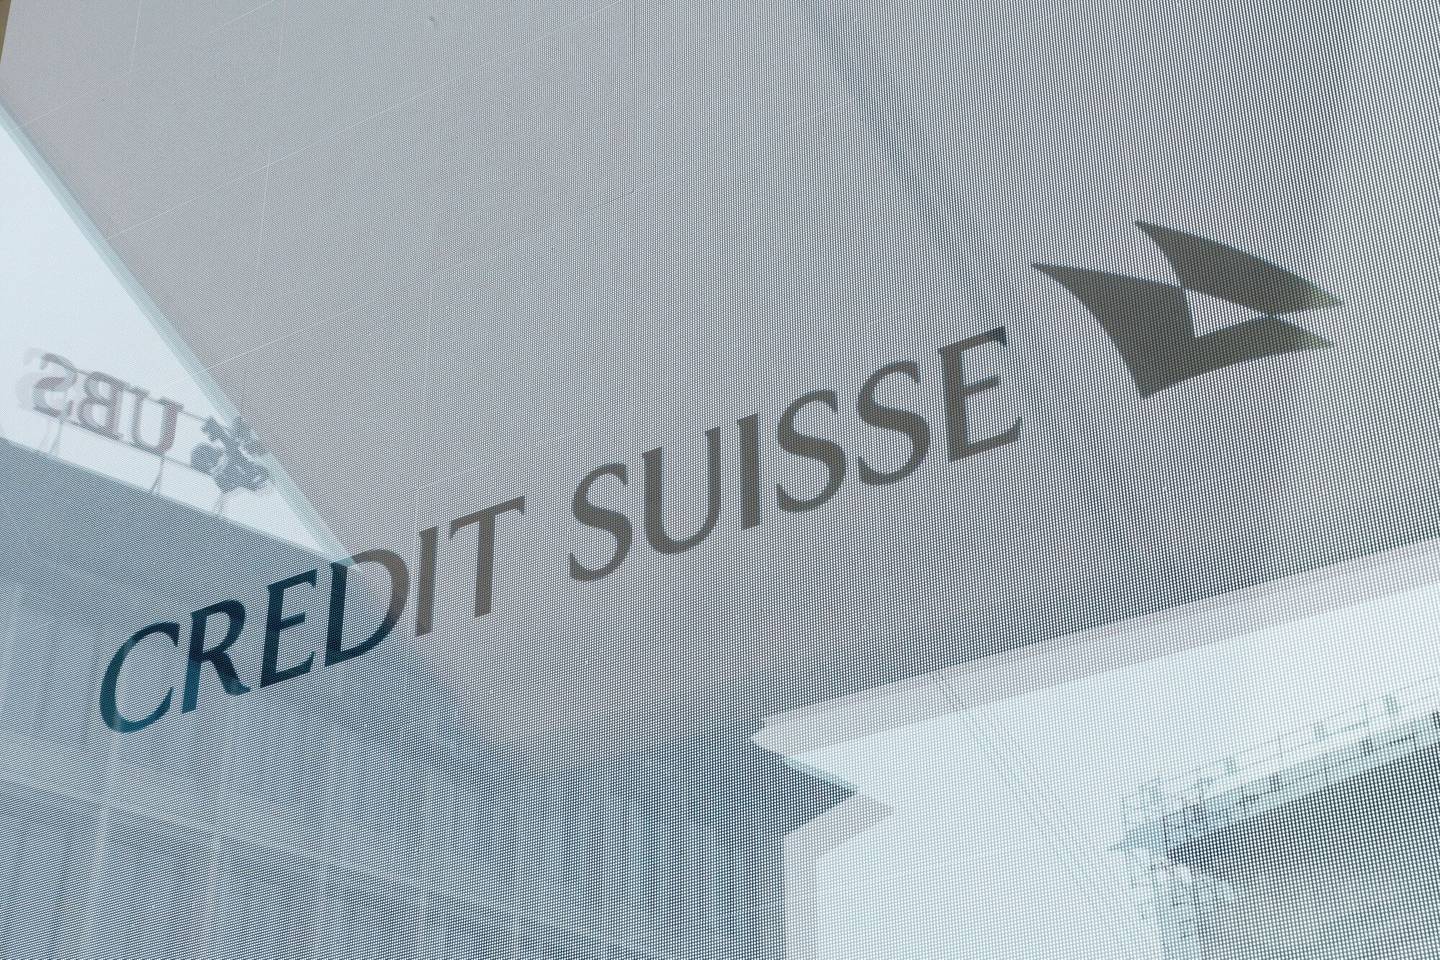 Signage in the window of the Credit Suisse Group AG headquarters in Zurich, Switzerland, on Tuesday, March 21, 2023. Recruiters across the world are getting an unprecedented flood of calls from?Credit Suisse bankers seeking new jobs as the embattled Swiss lender is set to be taken over by?UBS Group AG.dfd